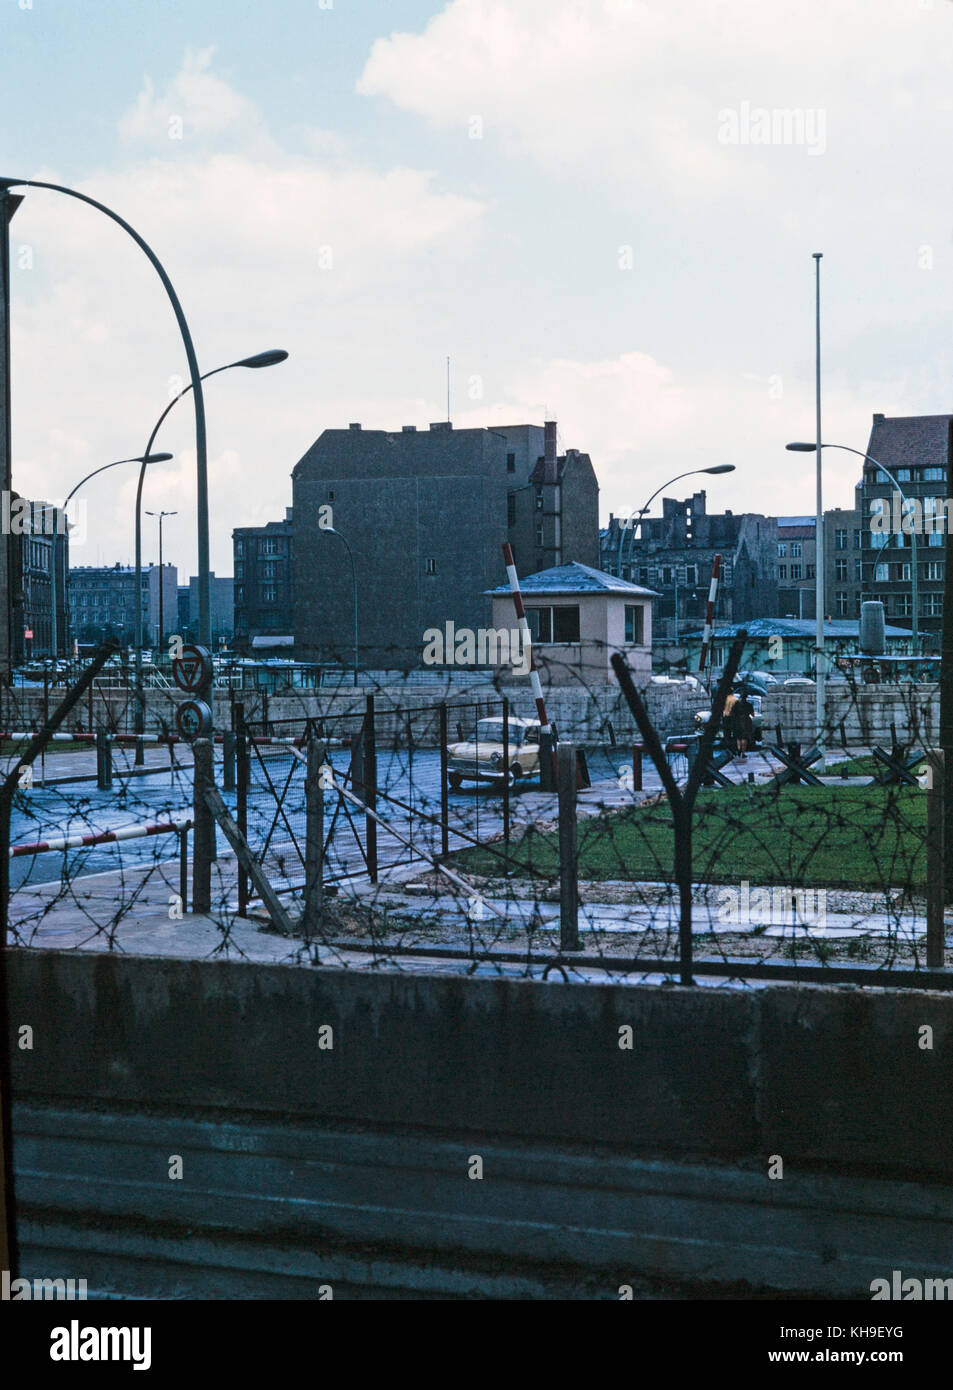 Photo taken in August 1965 showing view from the West German side of Berlin, across the Berlin Wall, to East Berlin in East Germany. Photo shows the wall covered in barbed wire and a military guard room. Stock Photo